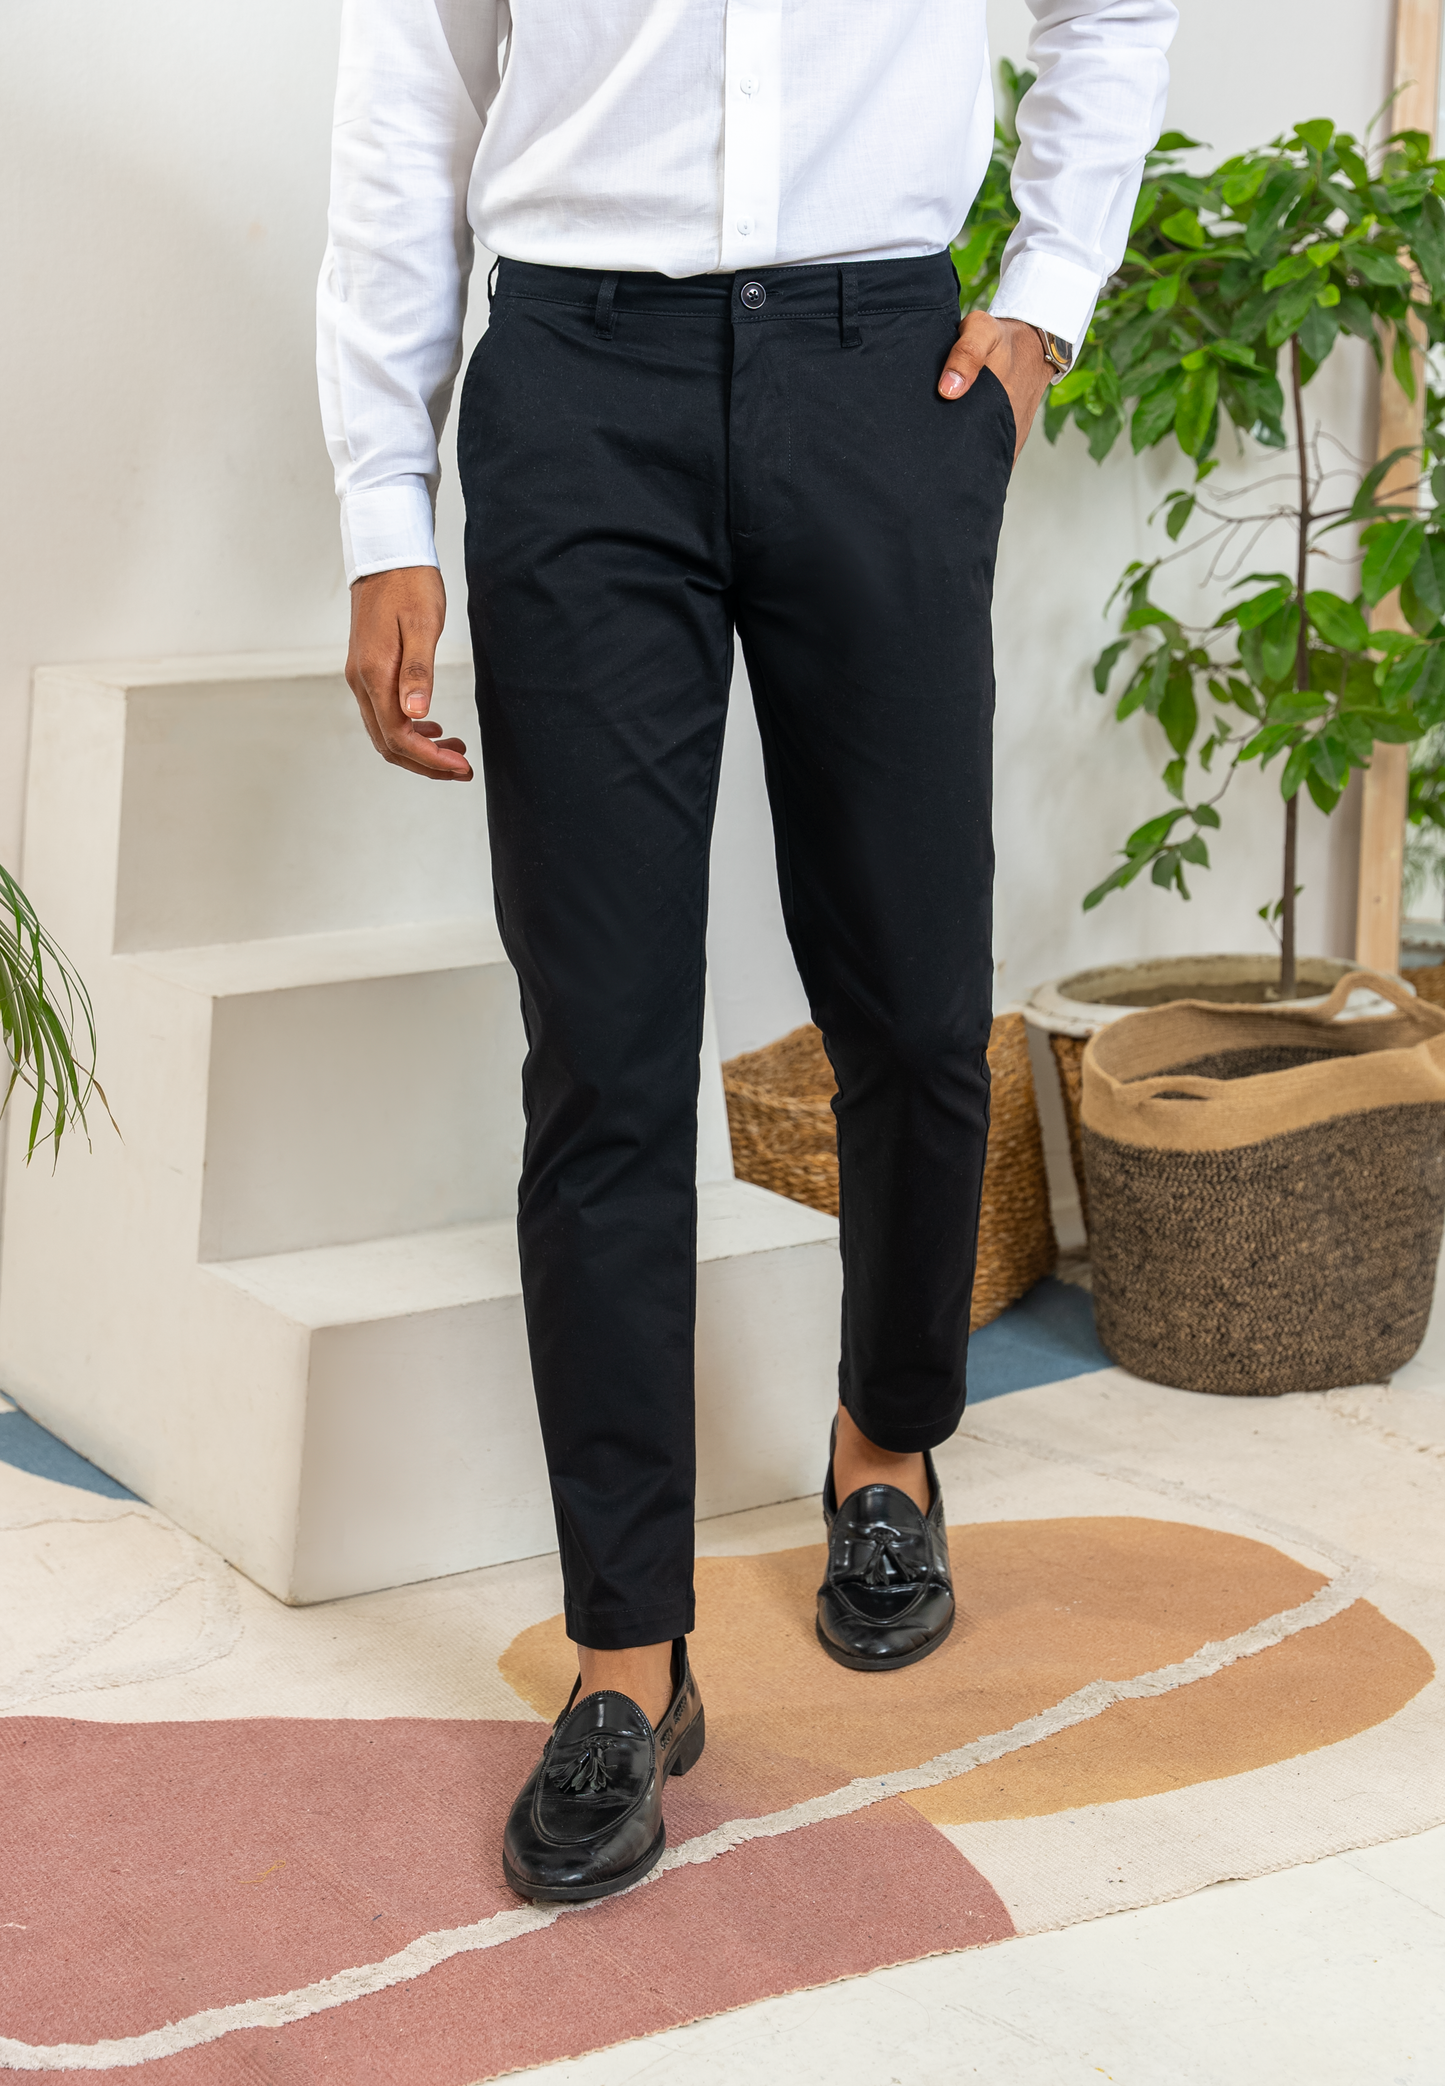 Black Chinos - Your Go To Pants